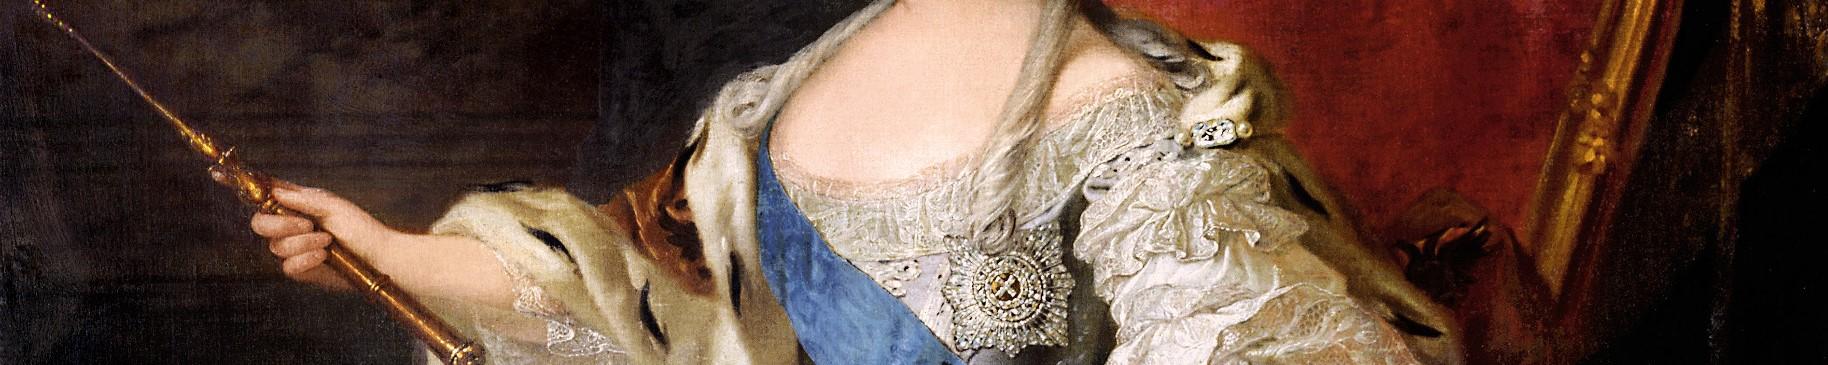 detail of a portrait of a woman dressed in white